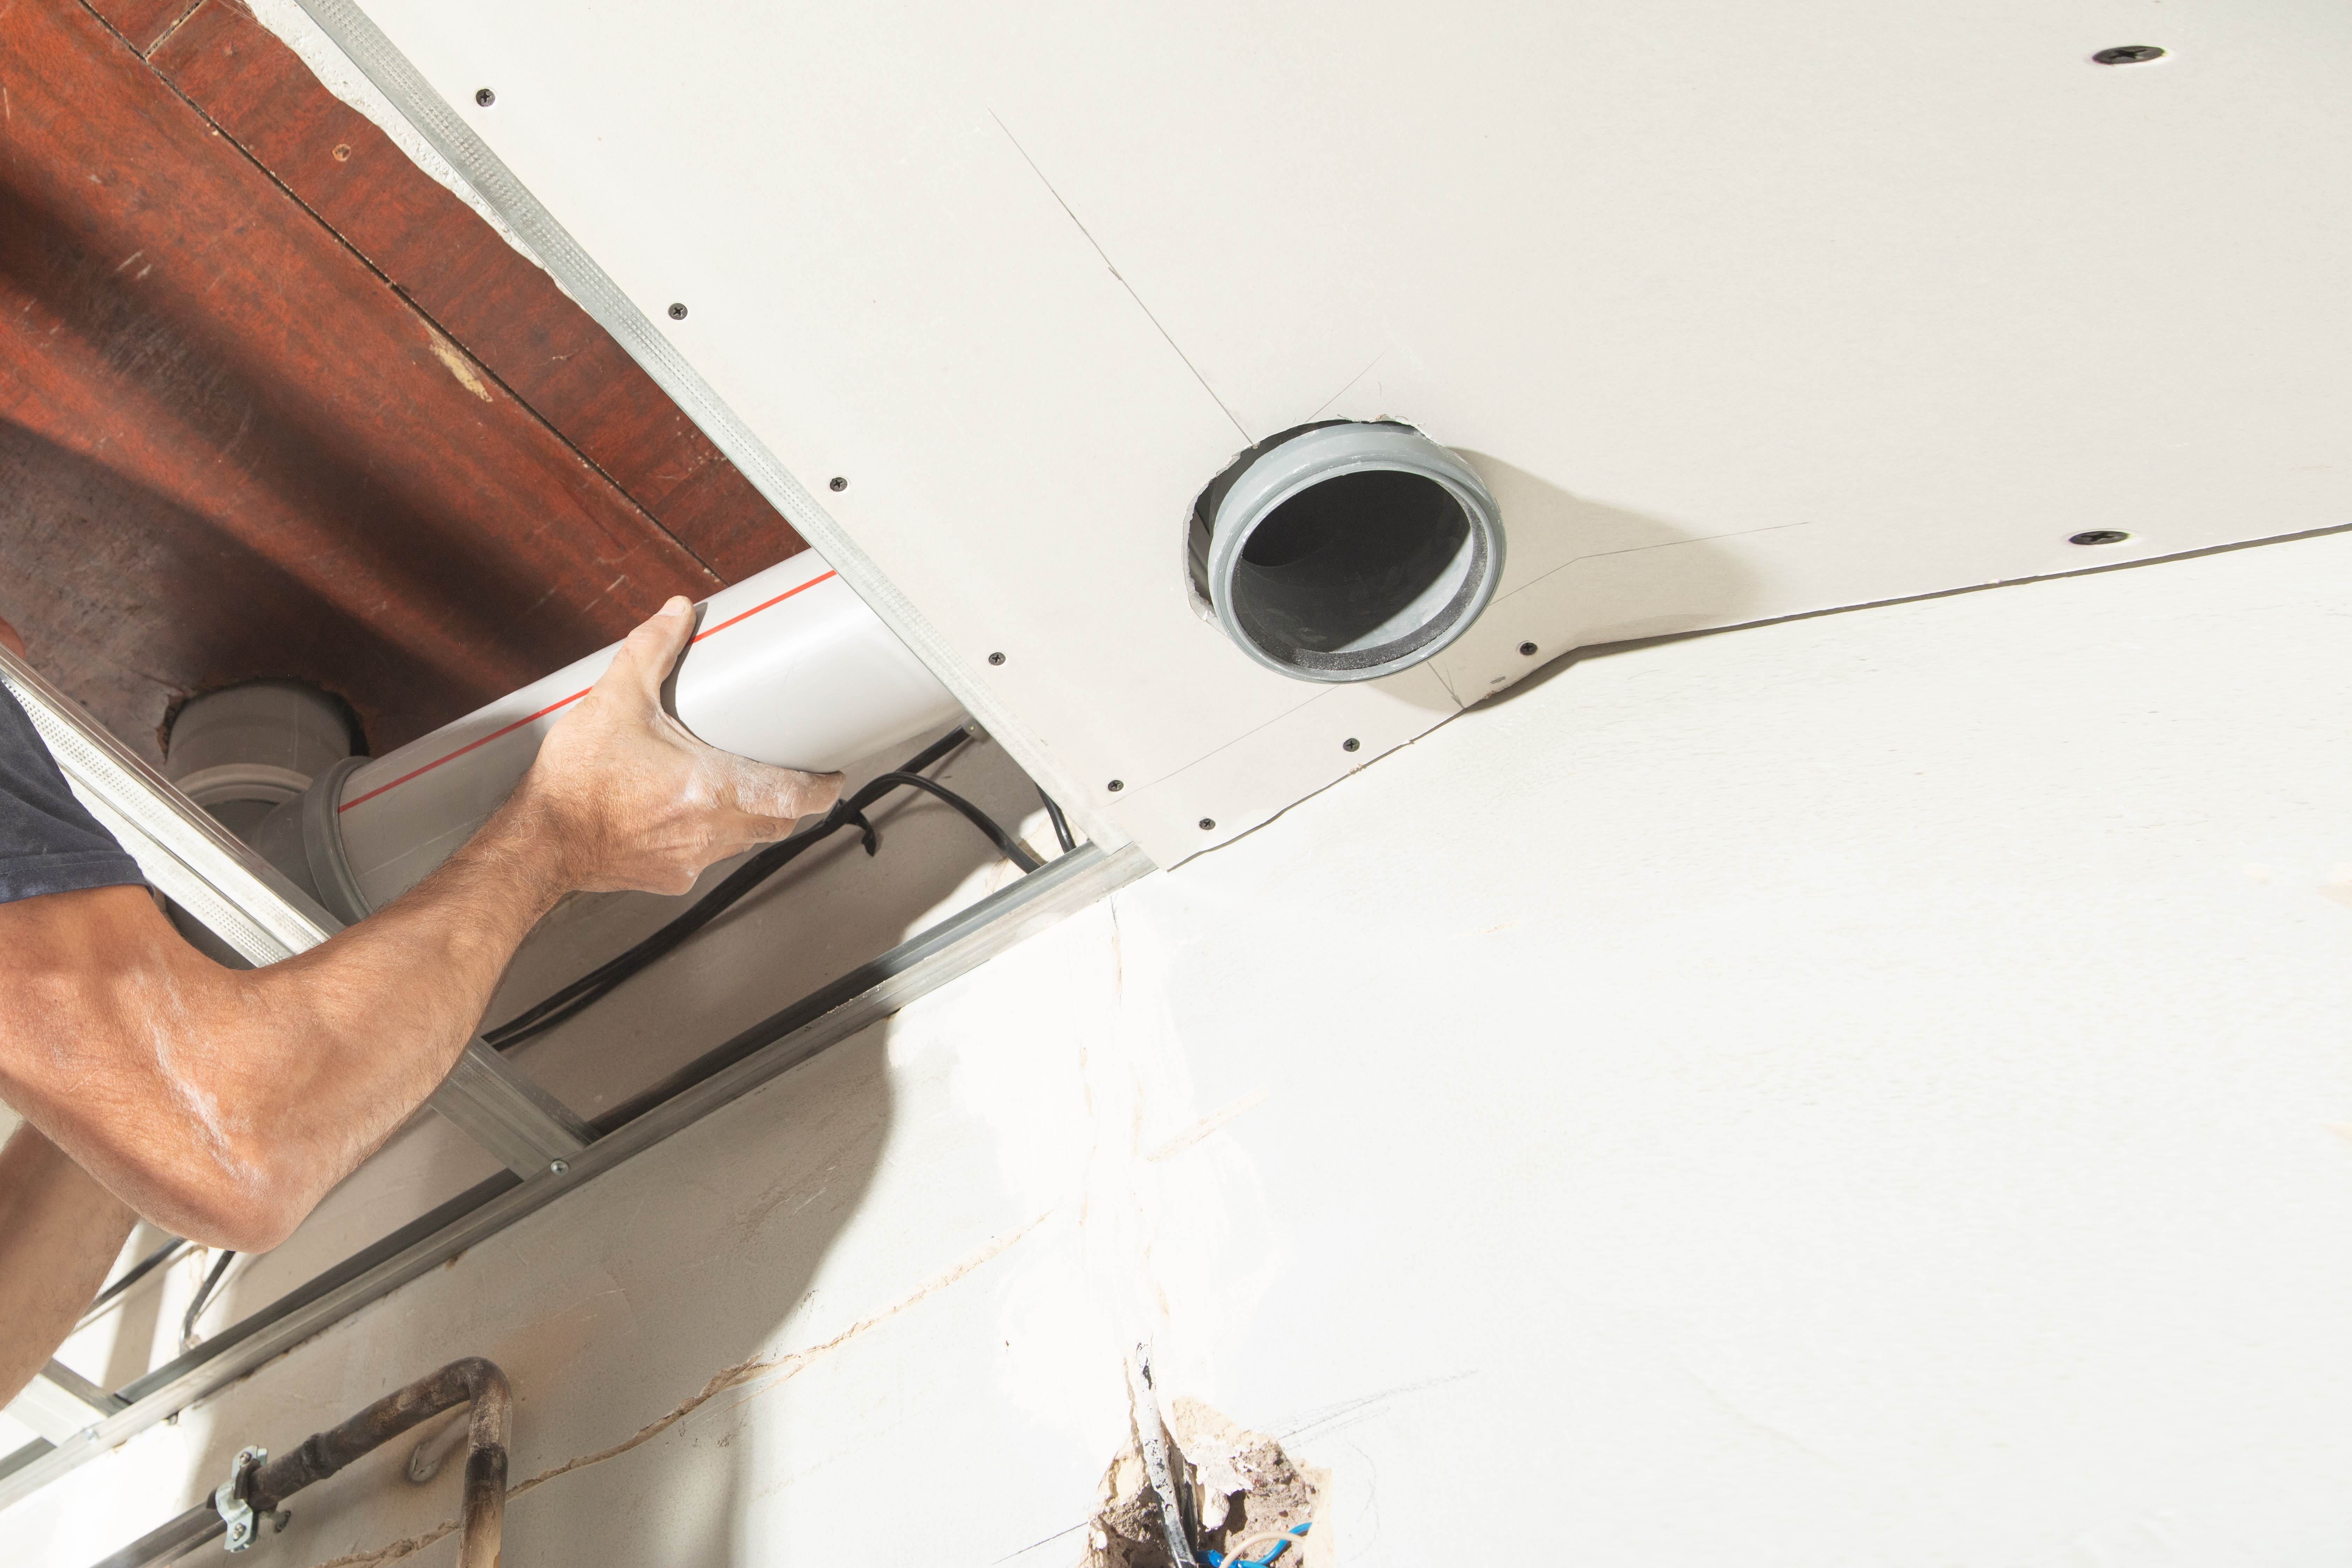 A completed HVAC system can be see in an open ceiling concept of a commercial
style building.